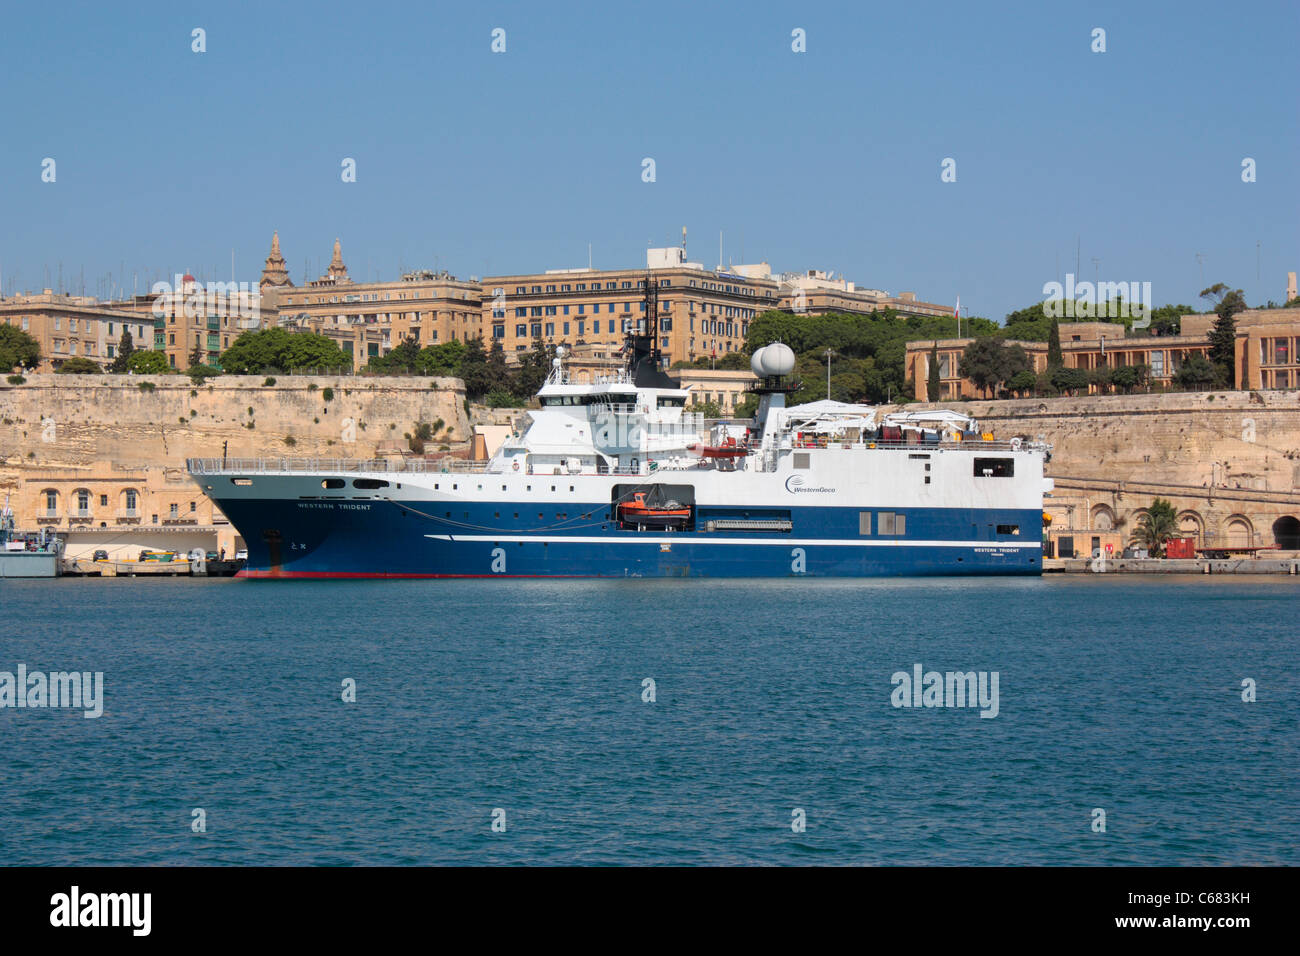 The survey ship Western Trident in Malta's Grand Harbour Stock Photo